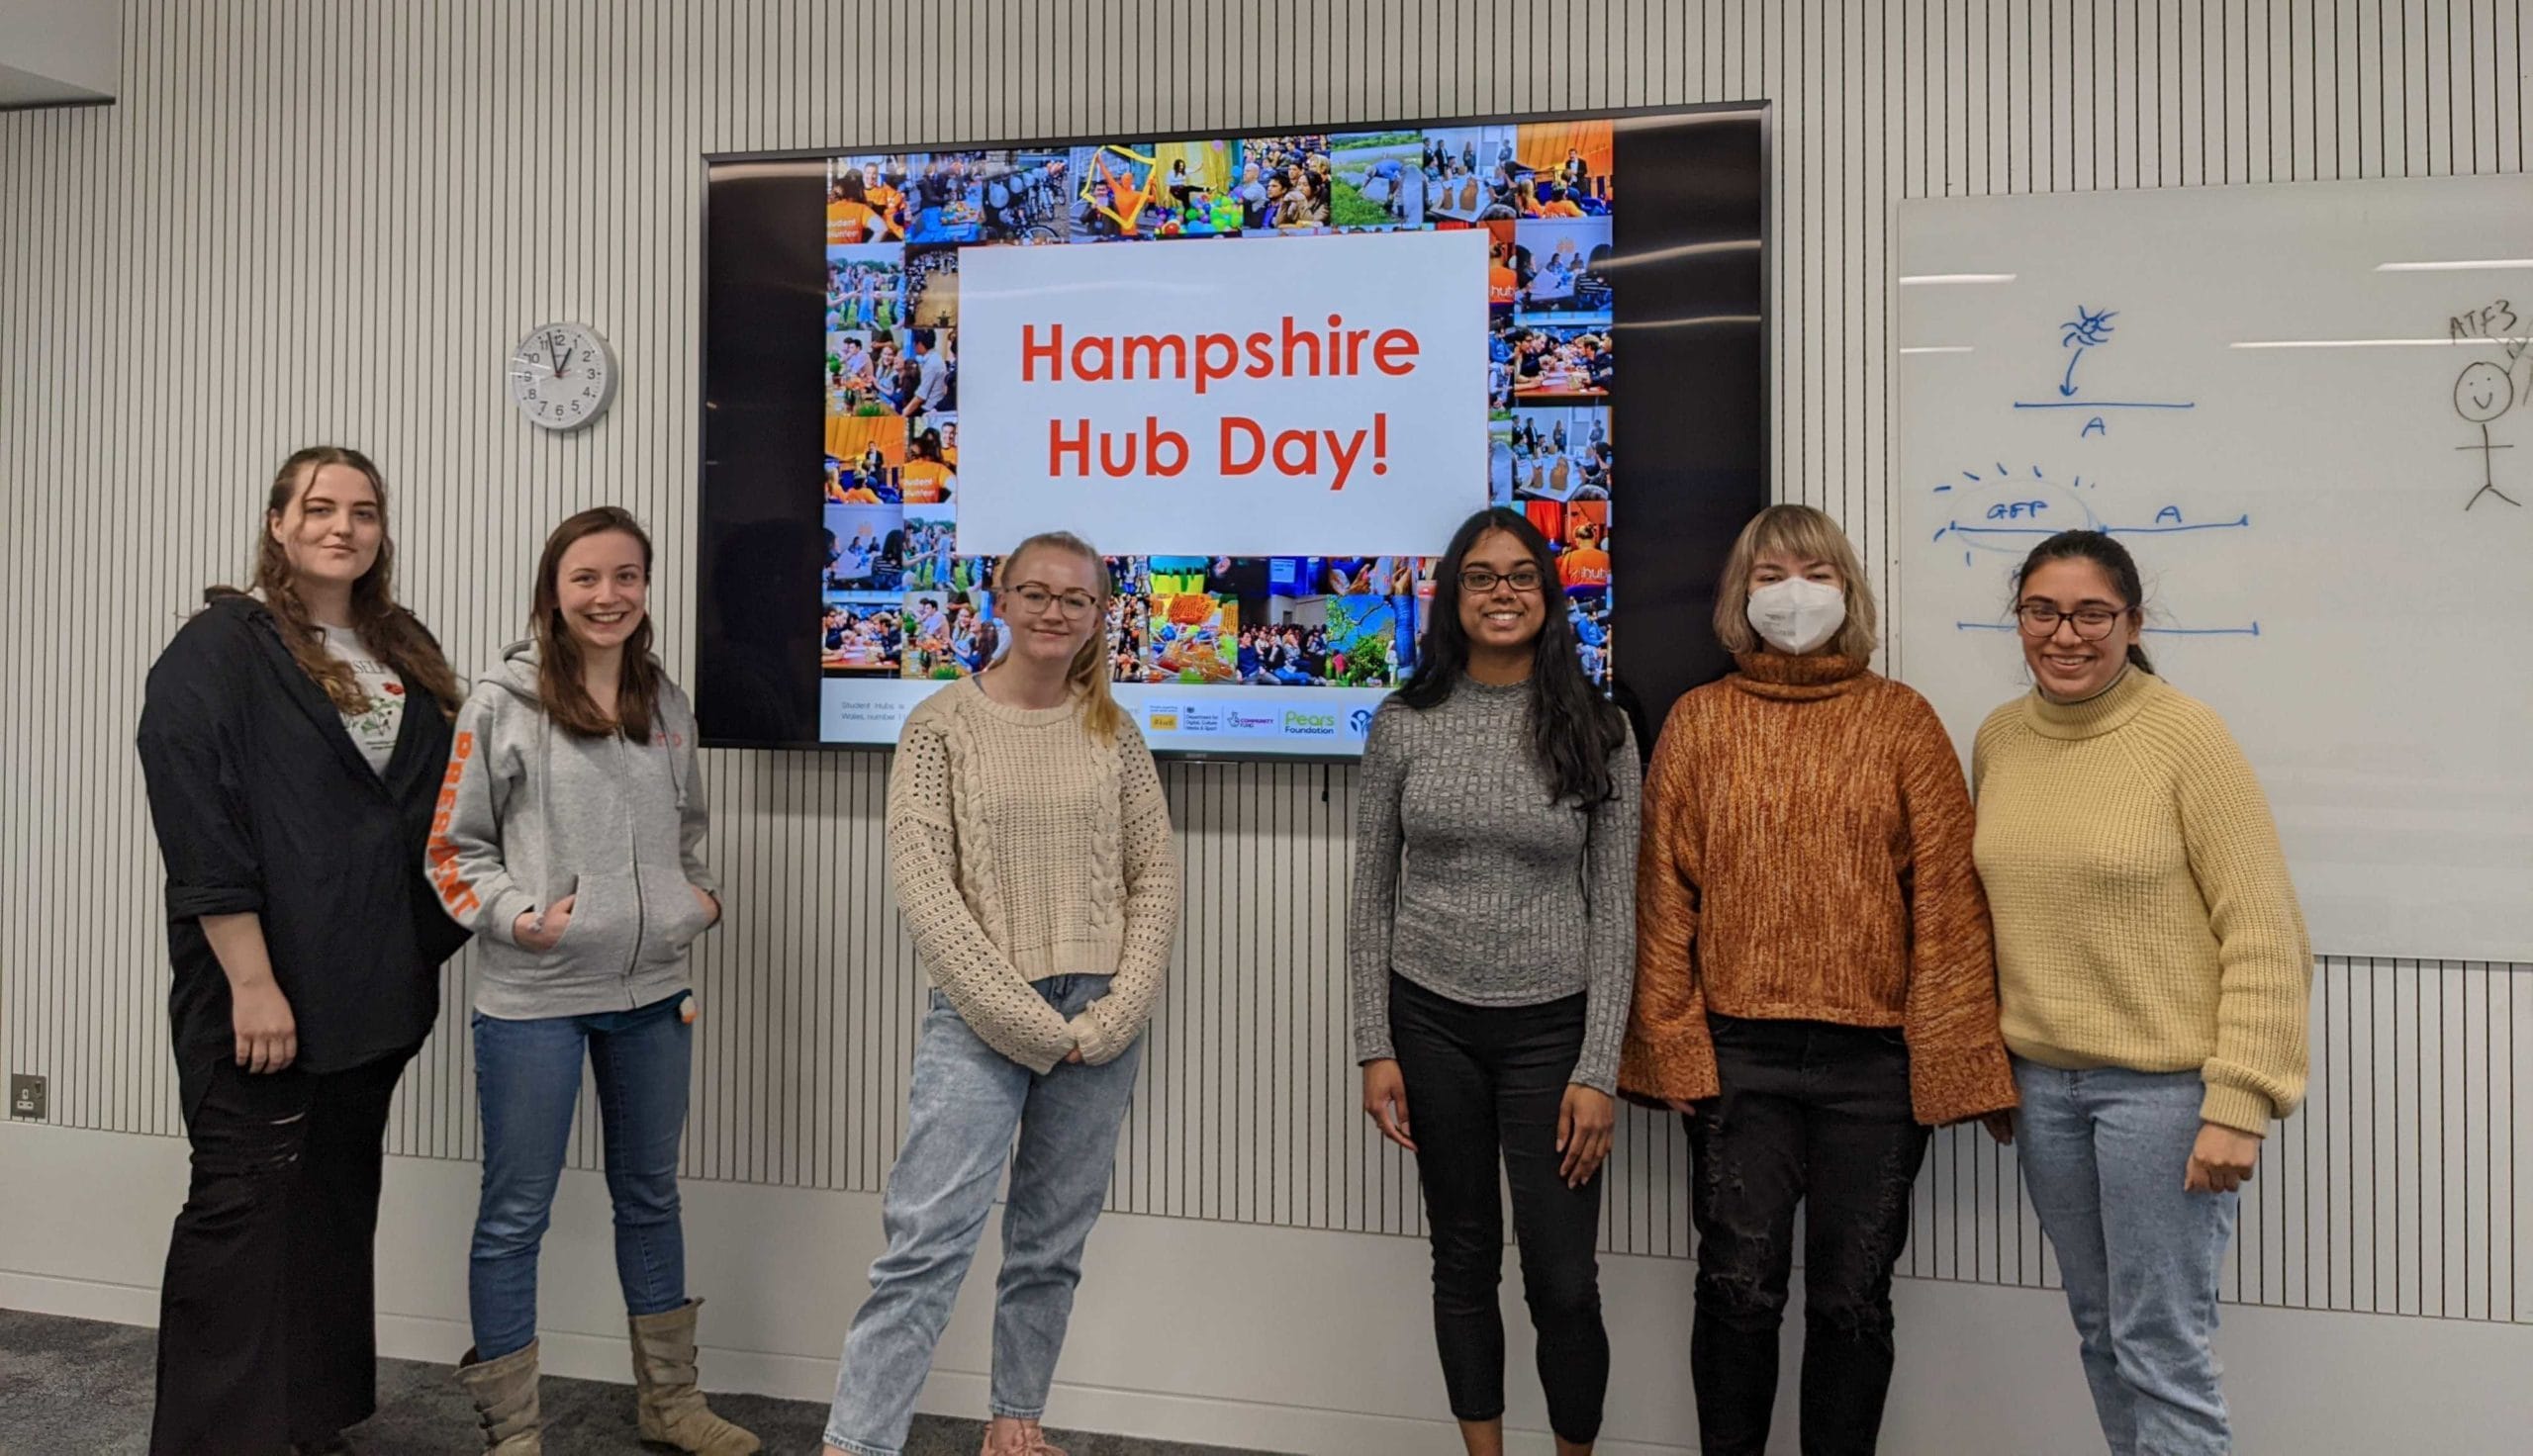 6 individuals stand smiling at the camera in front of a Digital screen showing a slide reading “Hampshire Hub Day”